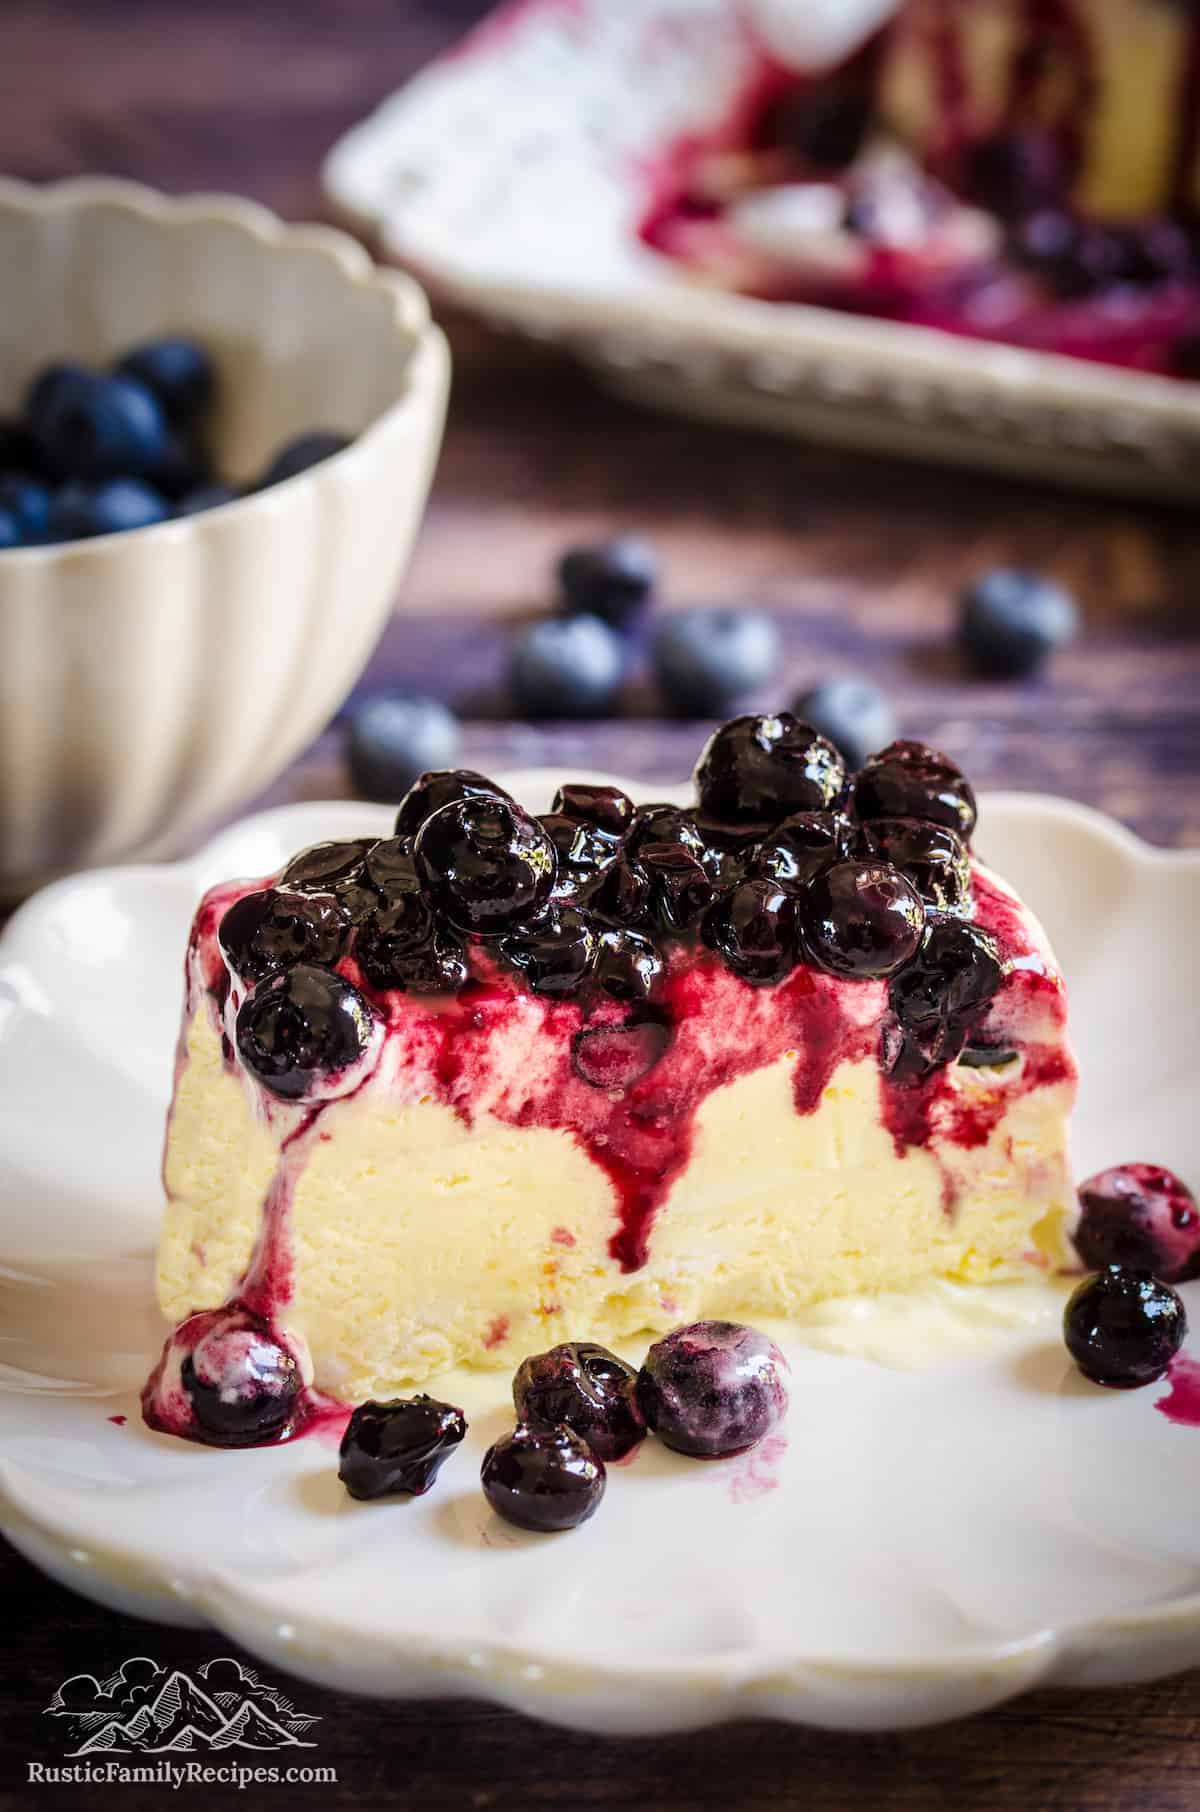 A slice of lemon blueberry semifreddo on a plate, topped with blueberry sauce.